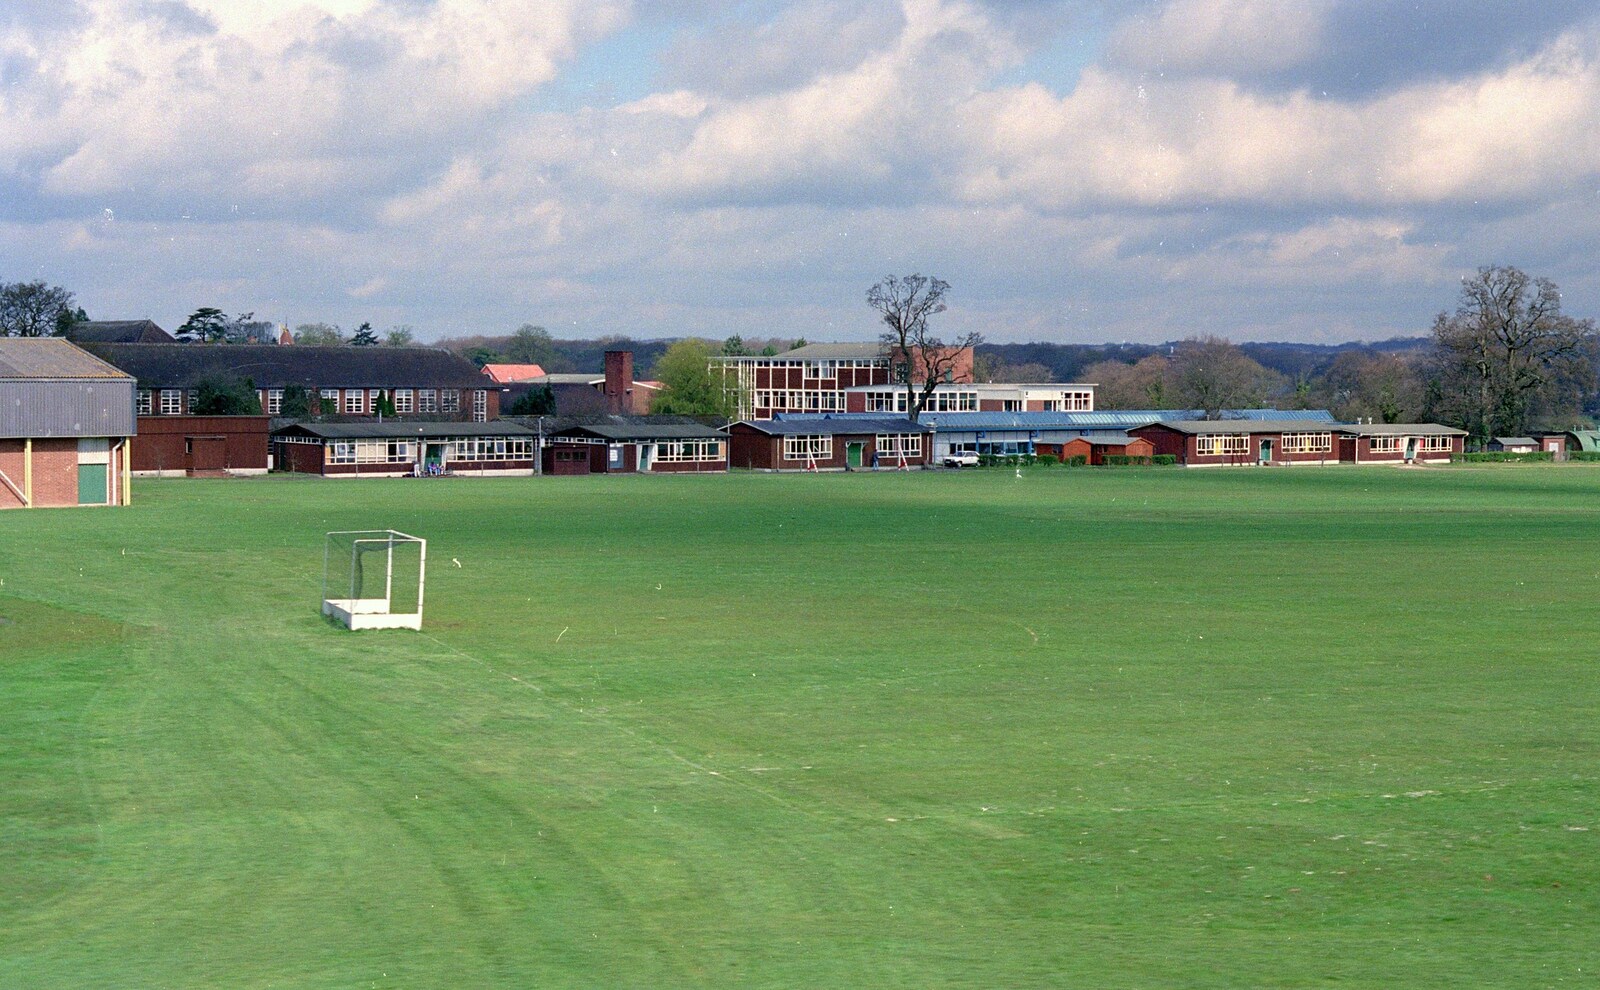 The Vineyard, Christchurch and Pizza, New Milton and the New Forest - 2nd April 1989: Brockenhurst College as seen from the train to London